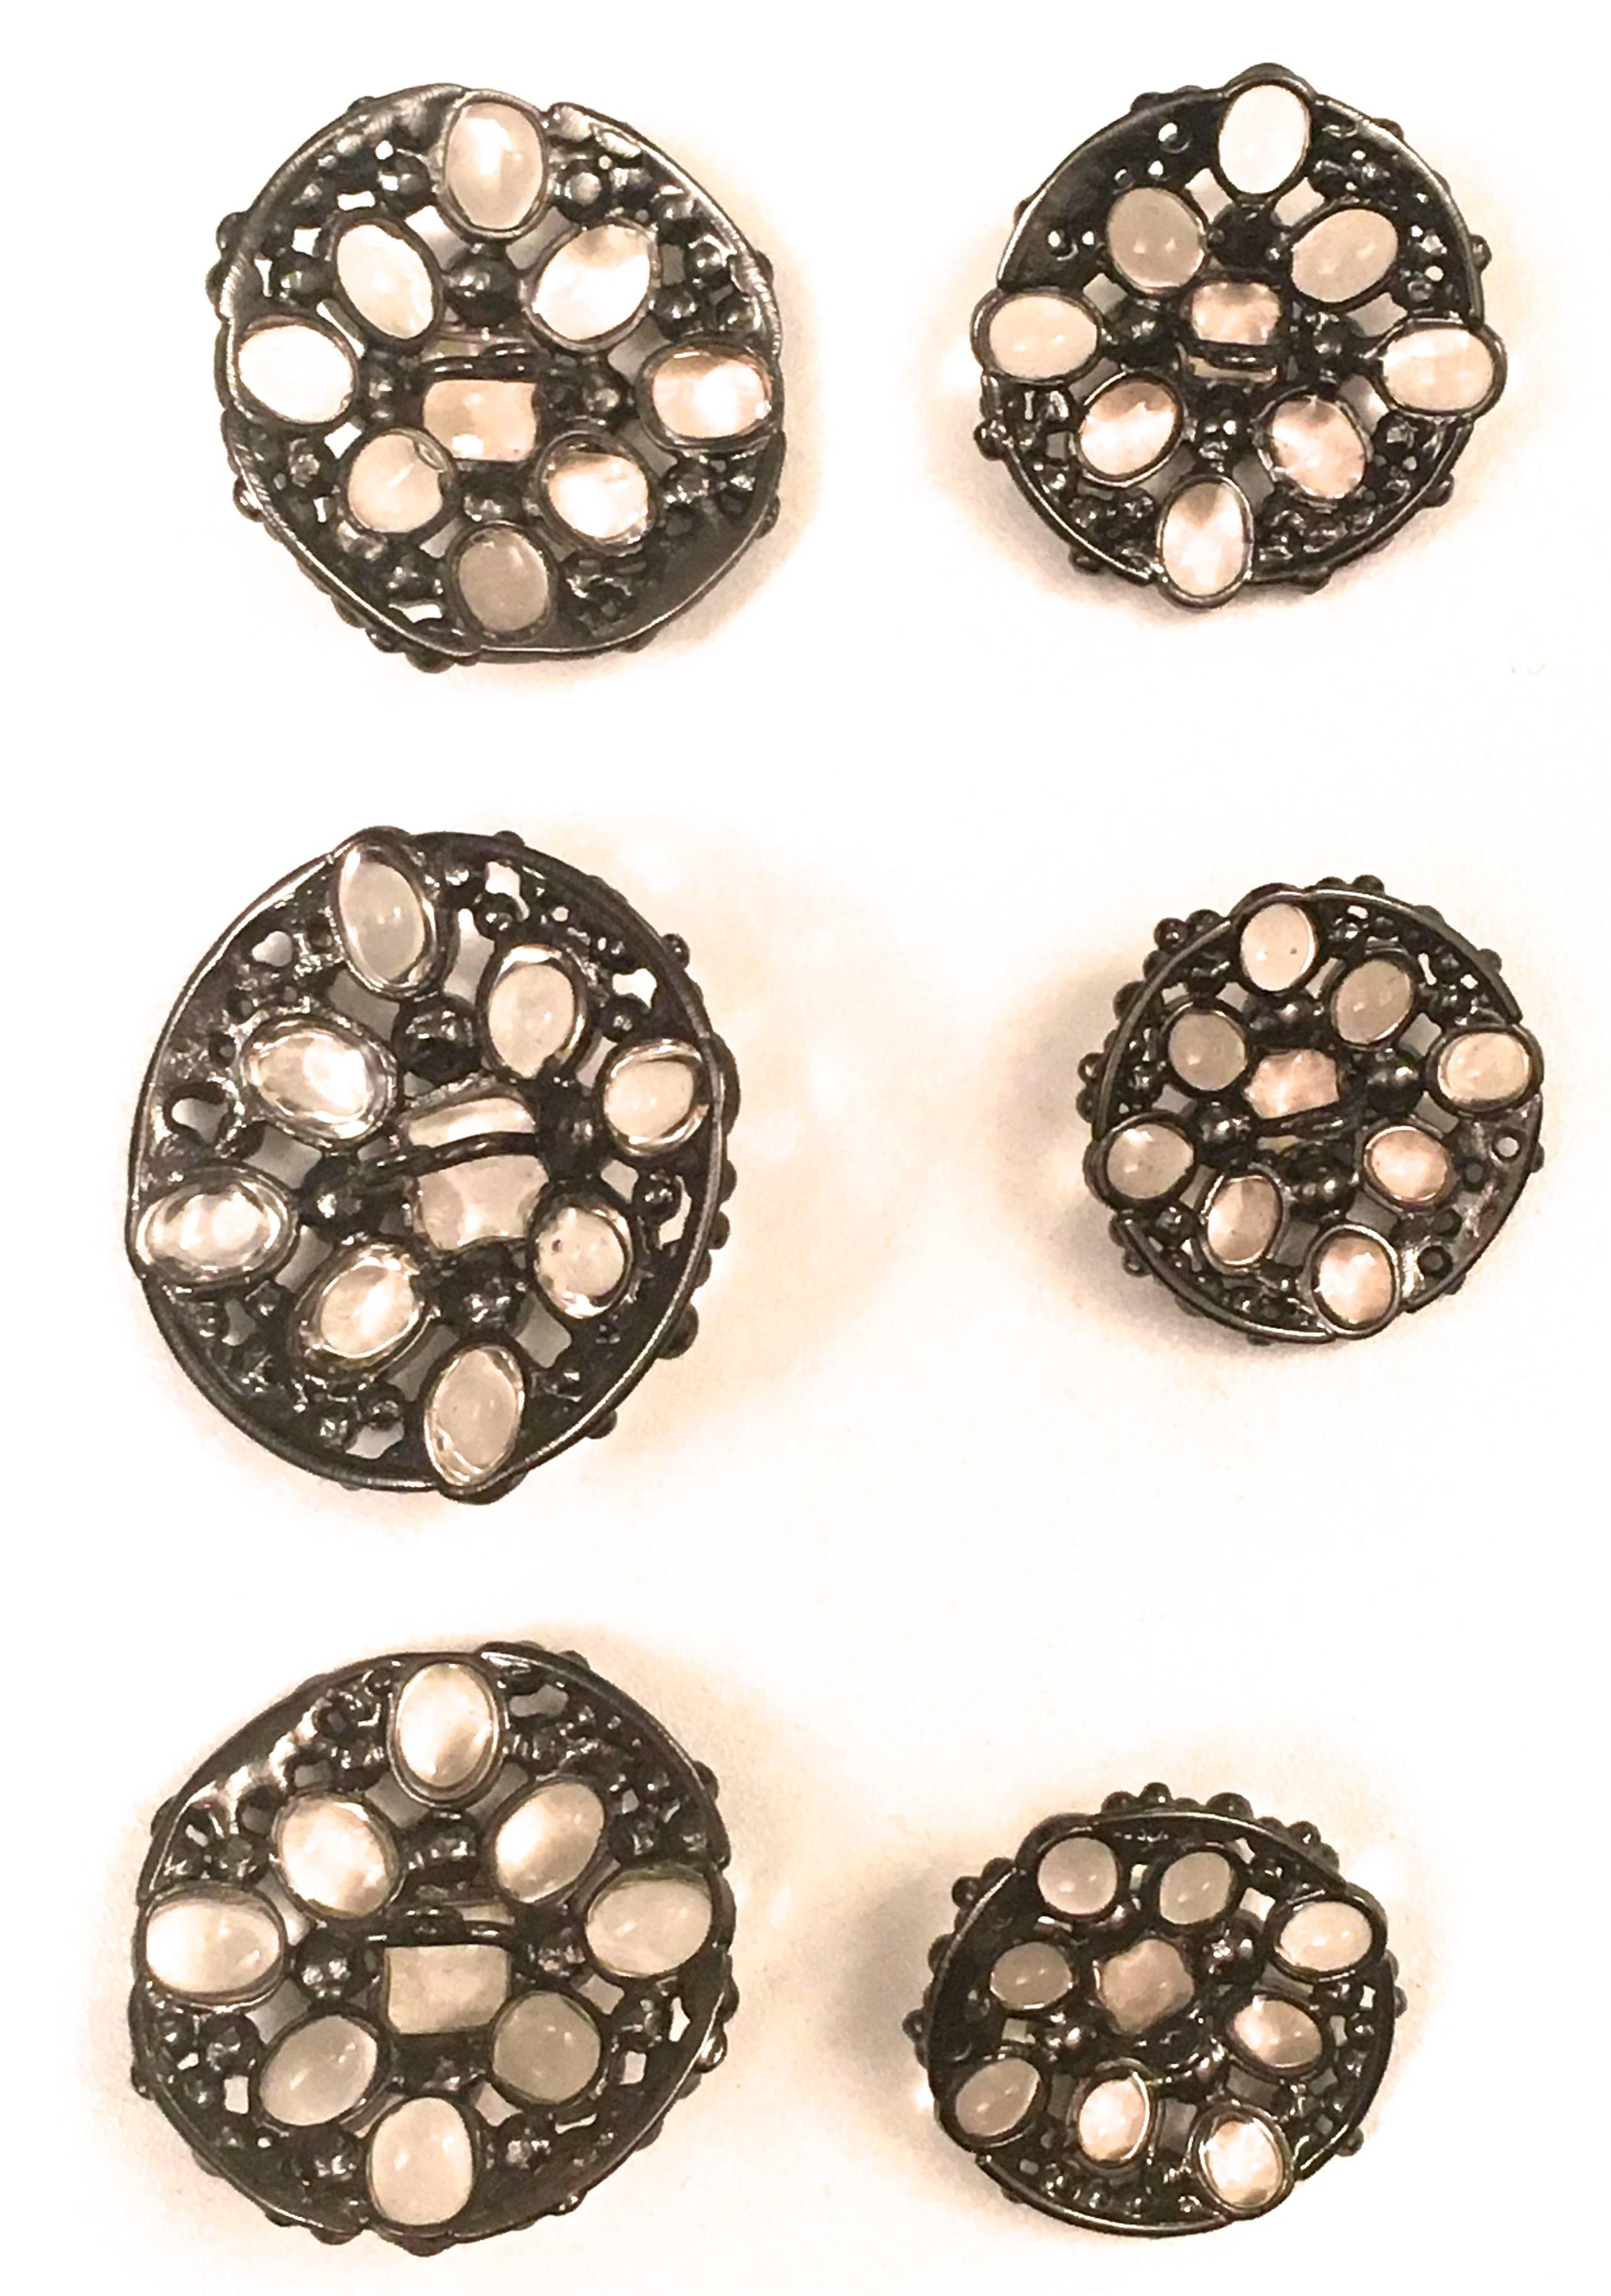 Chanel Gripoux Buttons - Matching Set of 6 - Inlay In New Condition For Sale In Boca Raton, FL